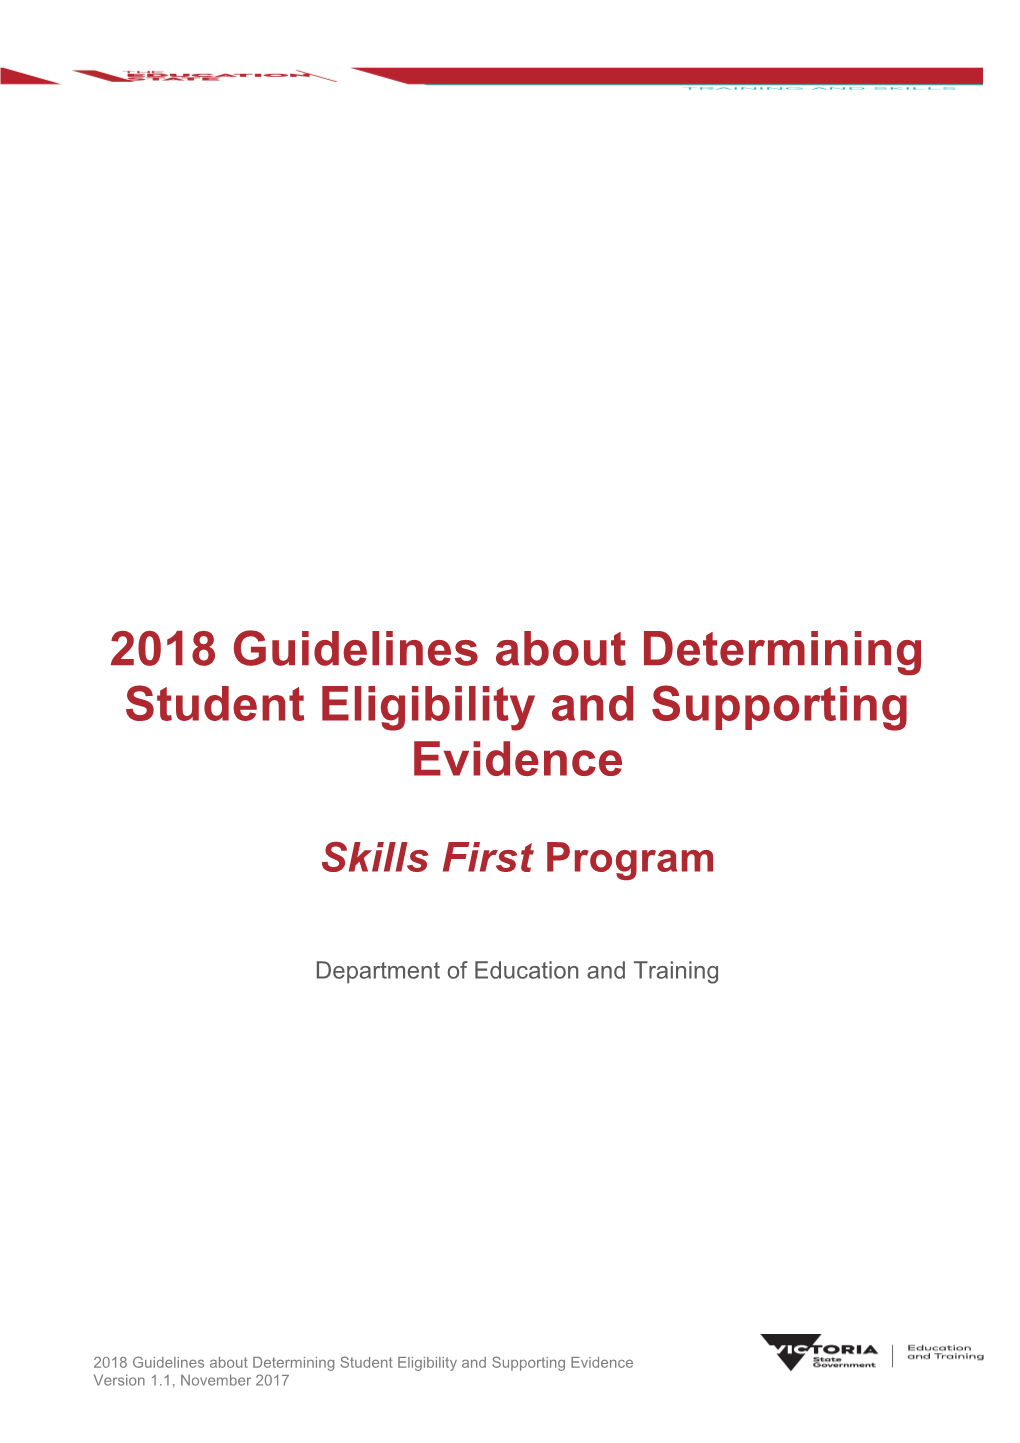 2018 Guidelines About Determining Student Eligibility and Supporting Evidence Version 1.0